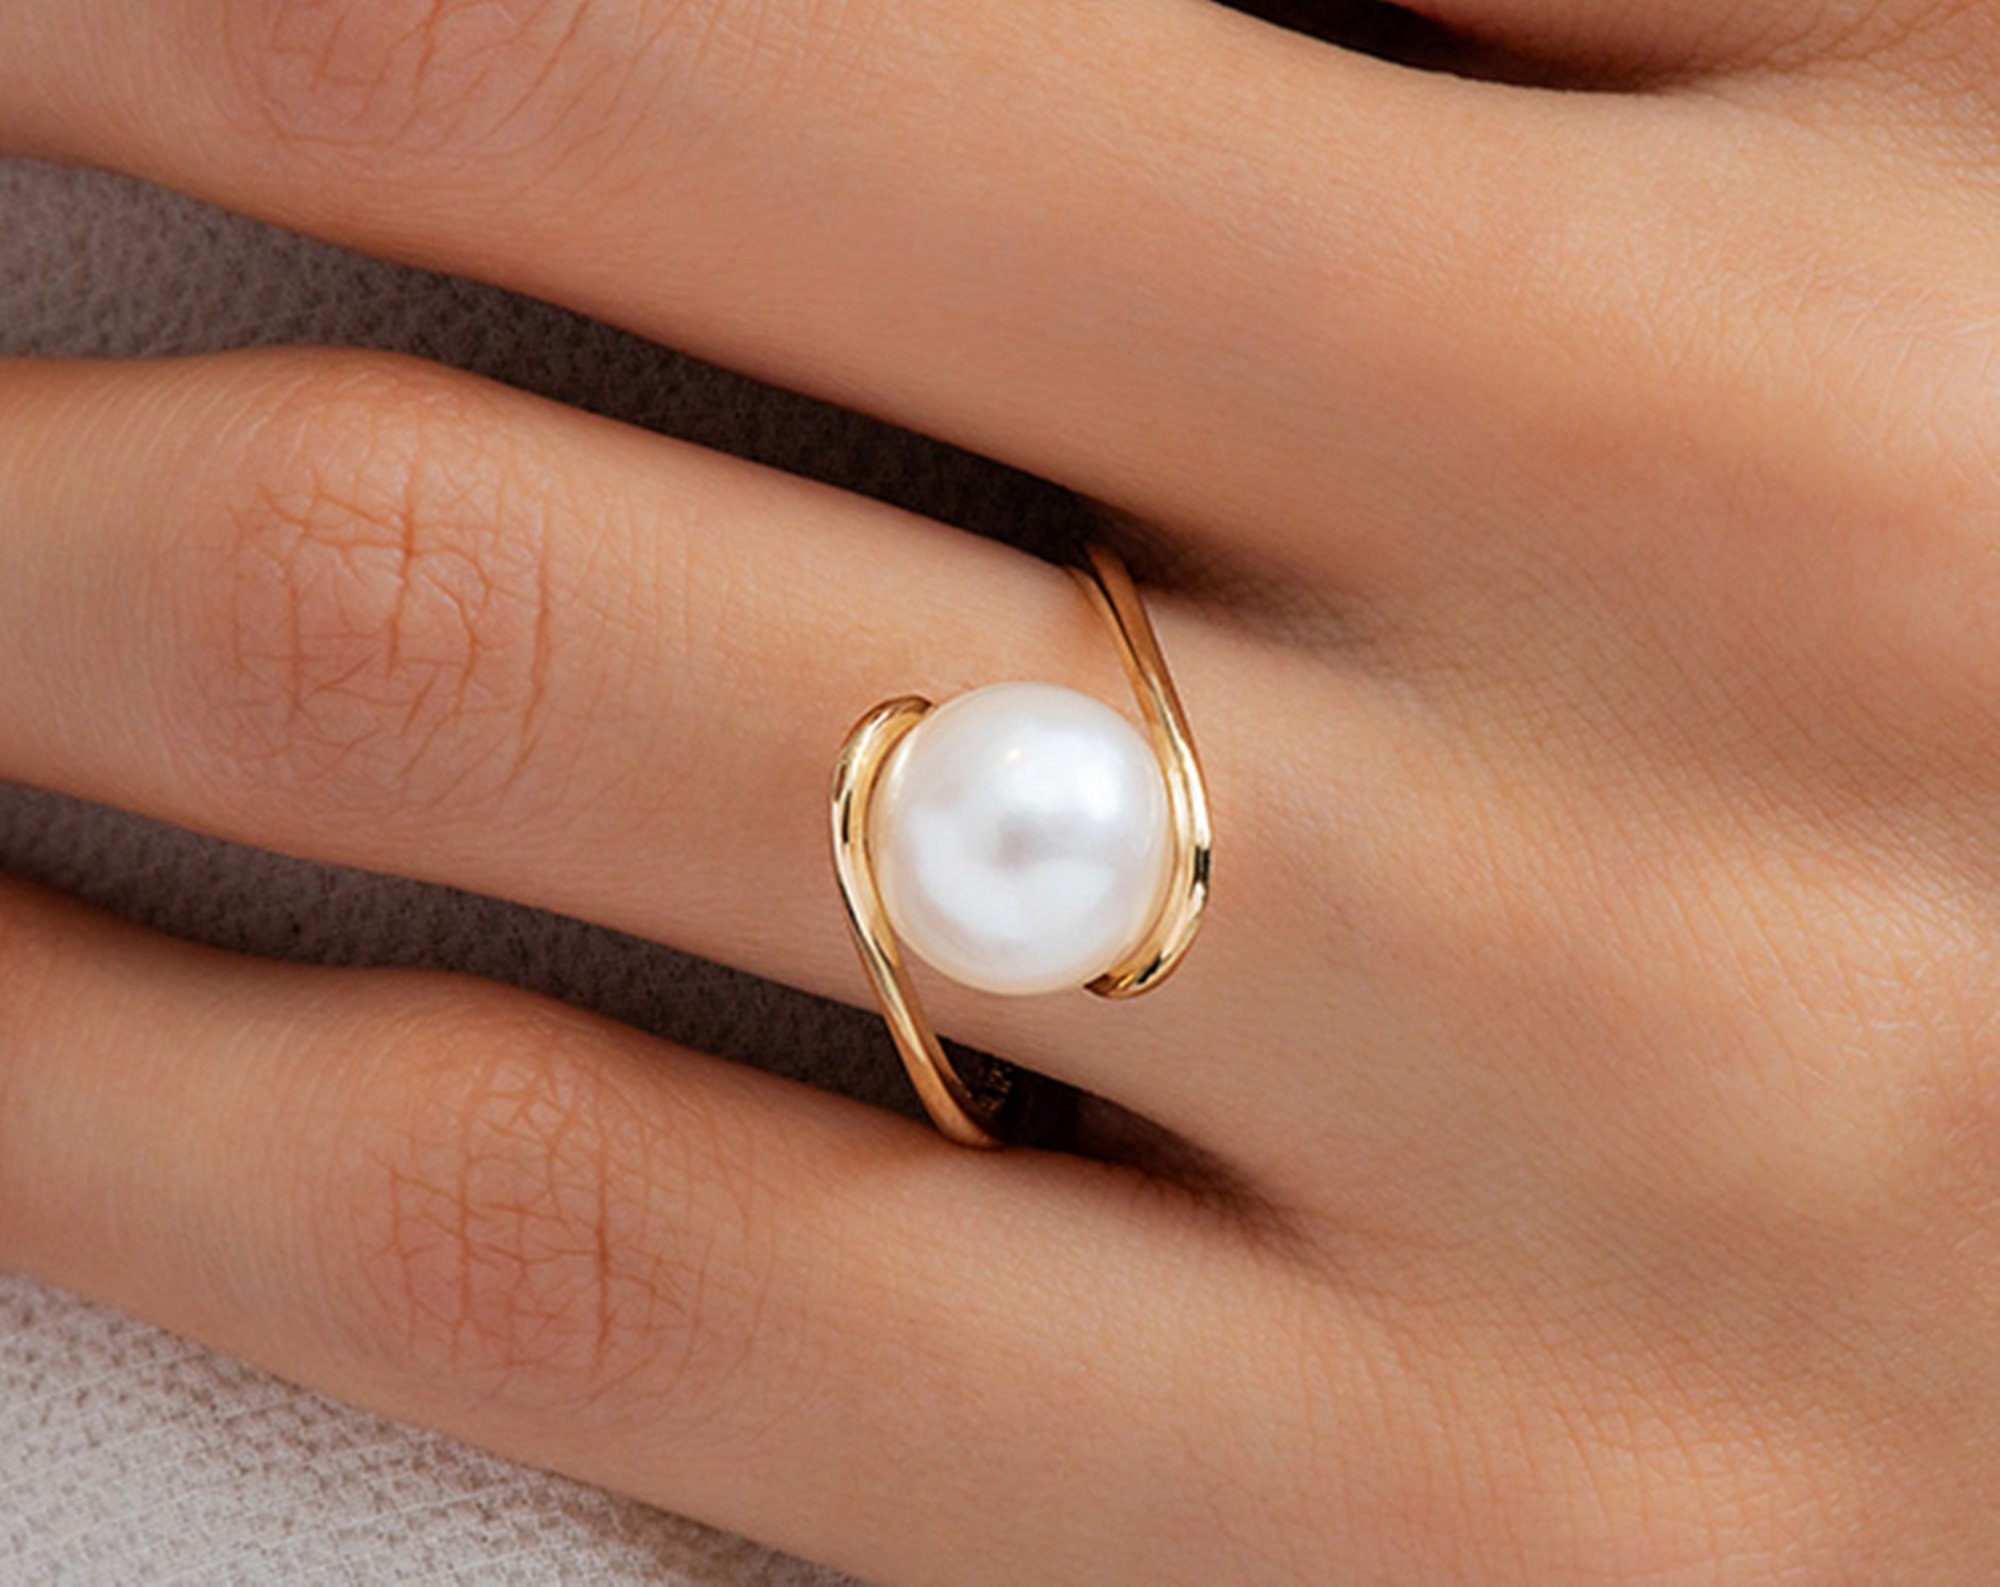 235-GR4436 - 22K Gold Ring For Women with Pearl | Gold rings, 22k gold ring,  Gold ring designs